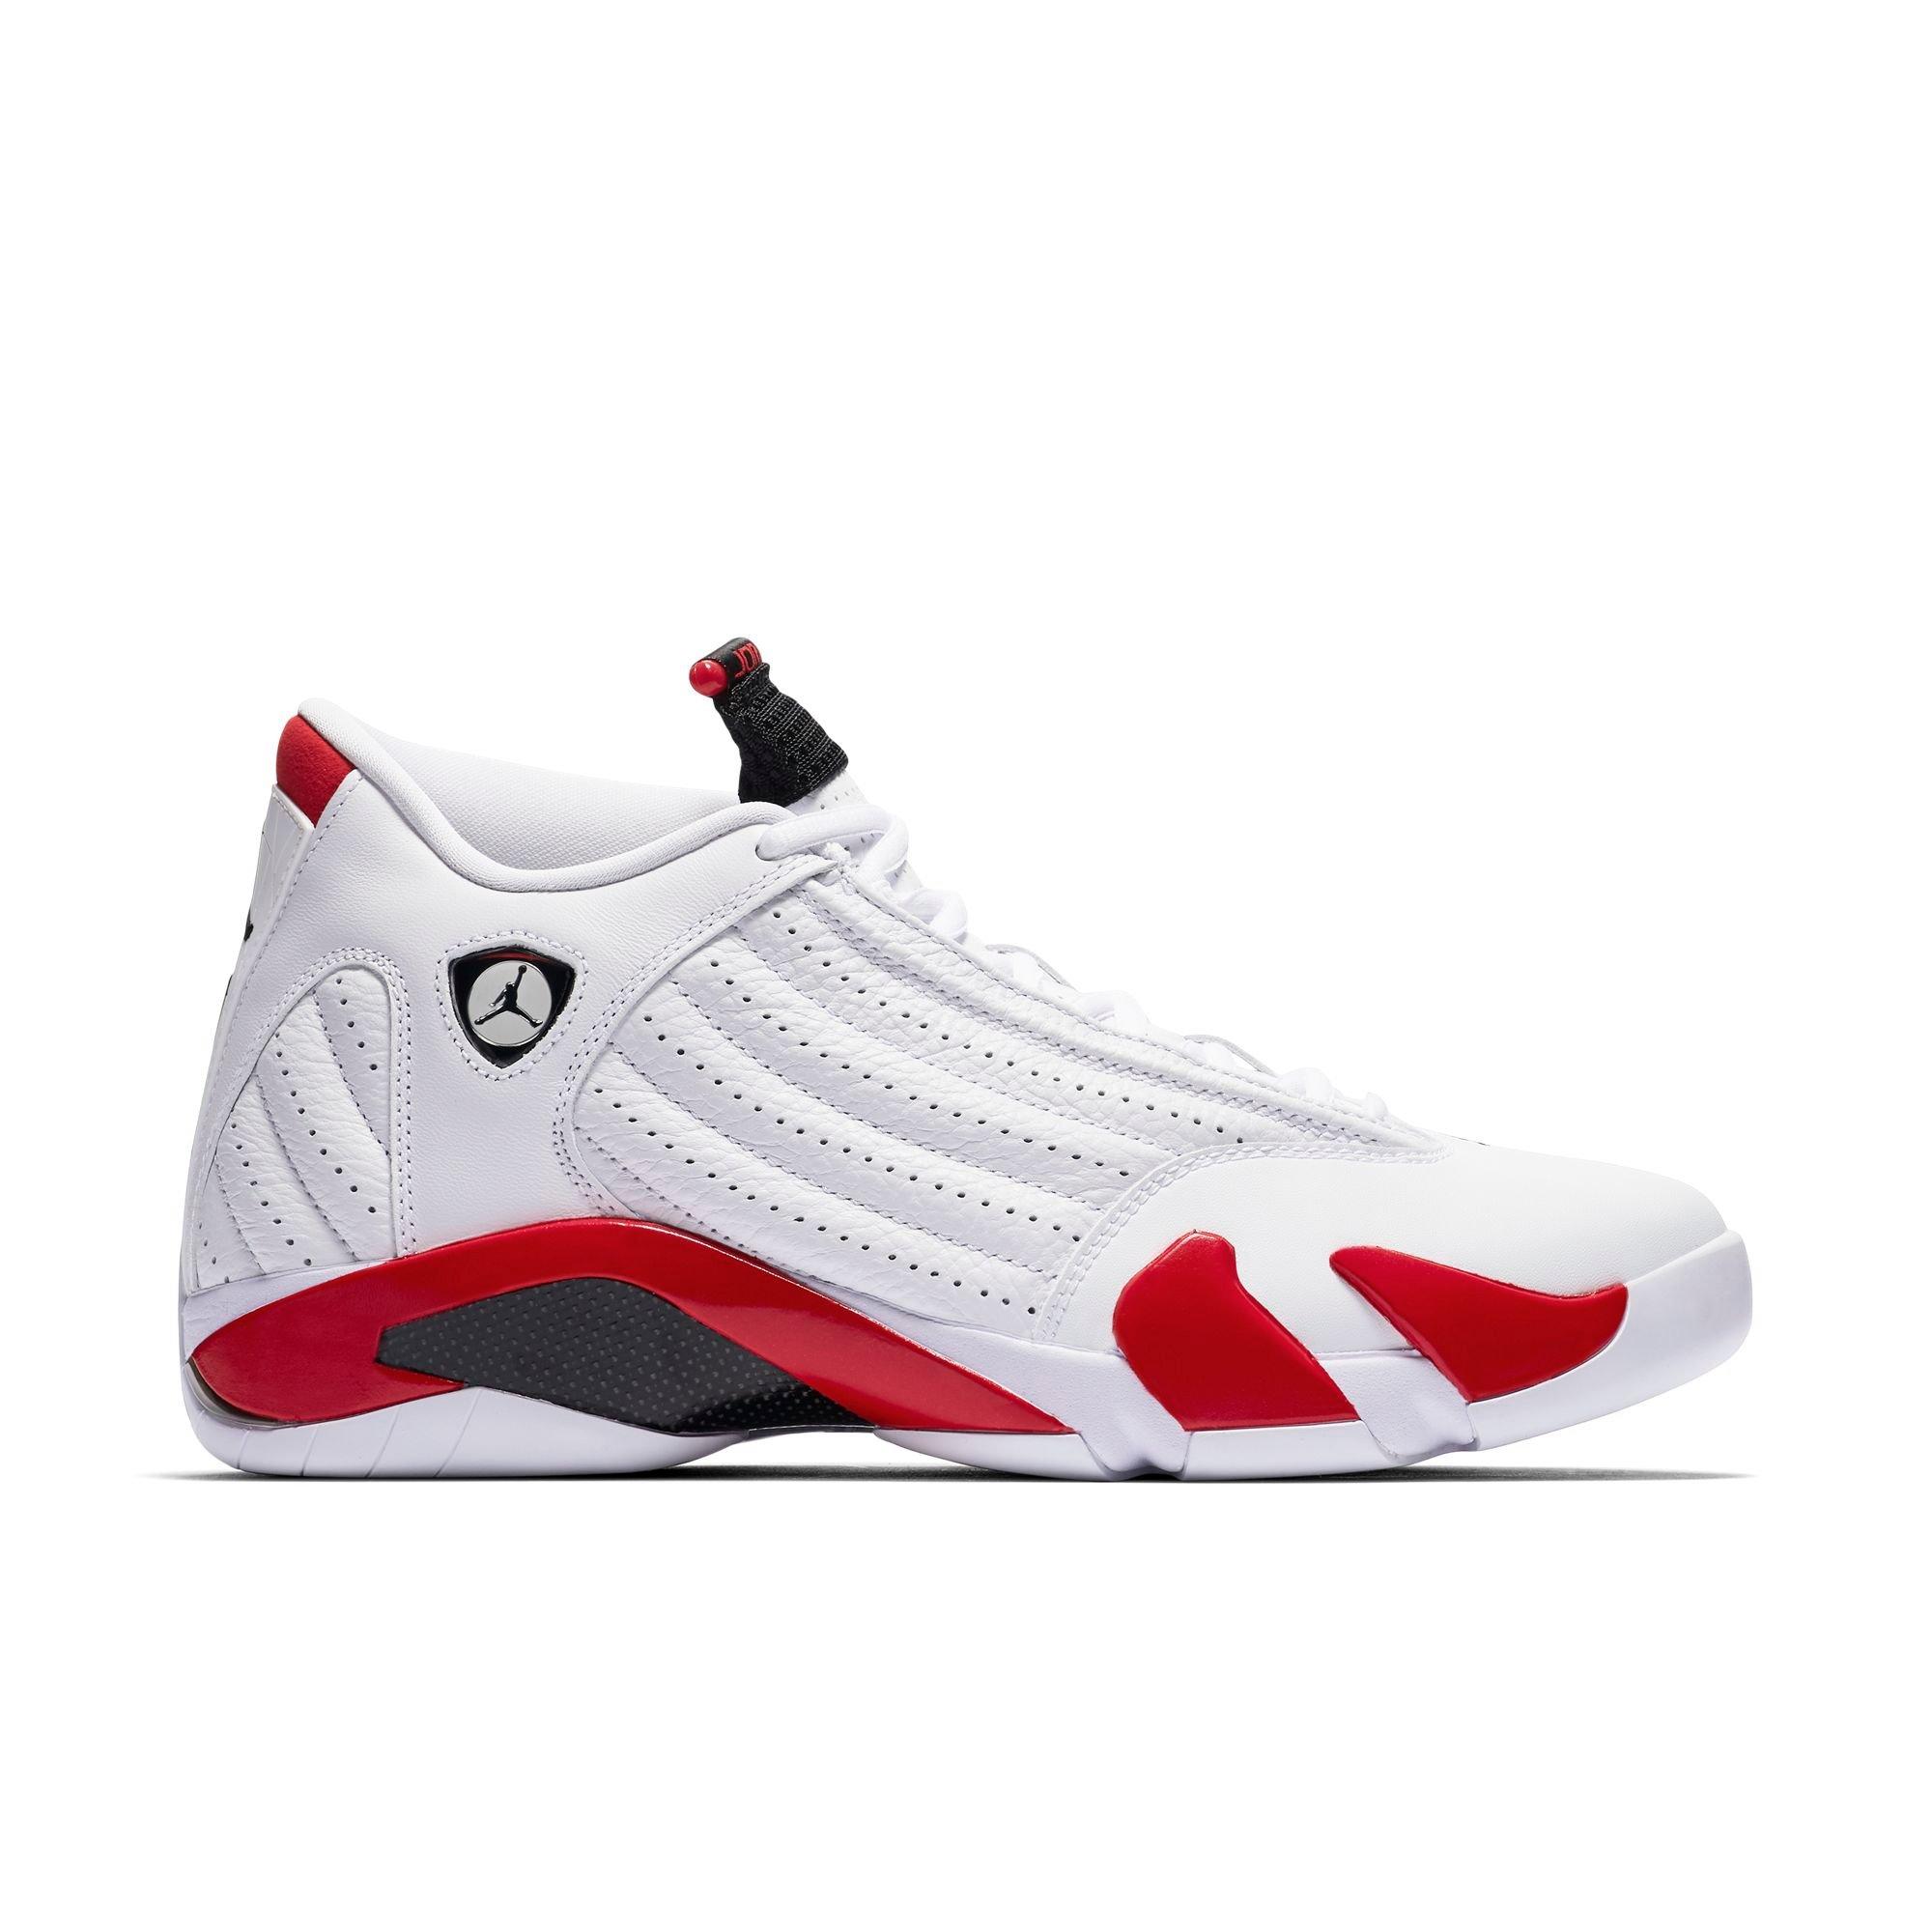 red and white 14s jordans online -